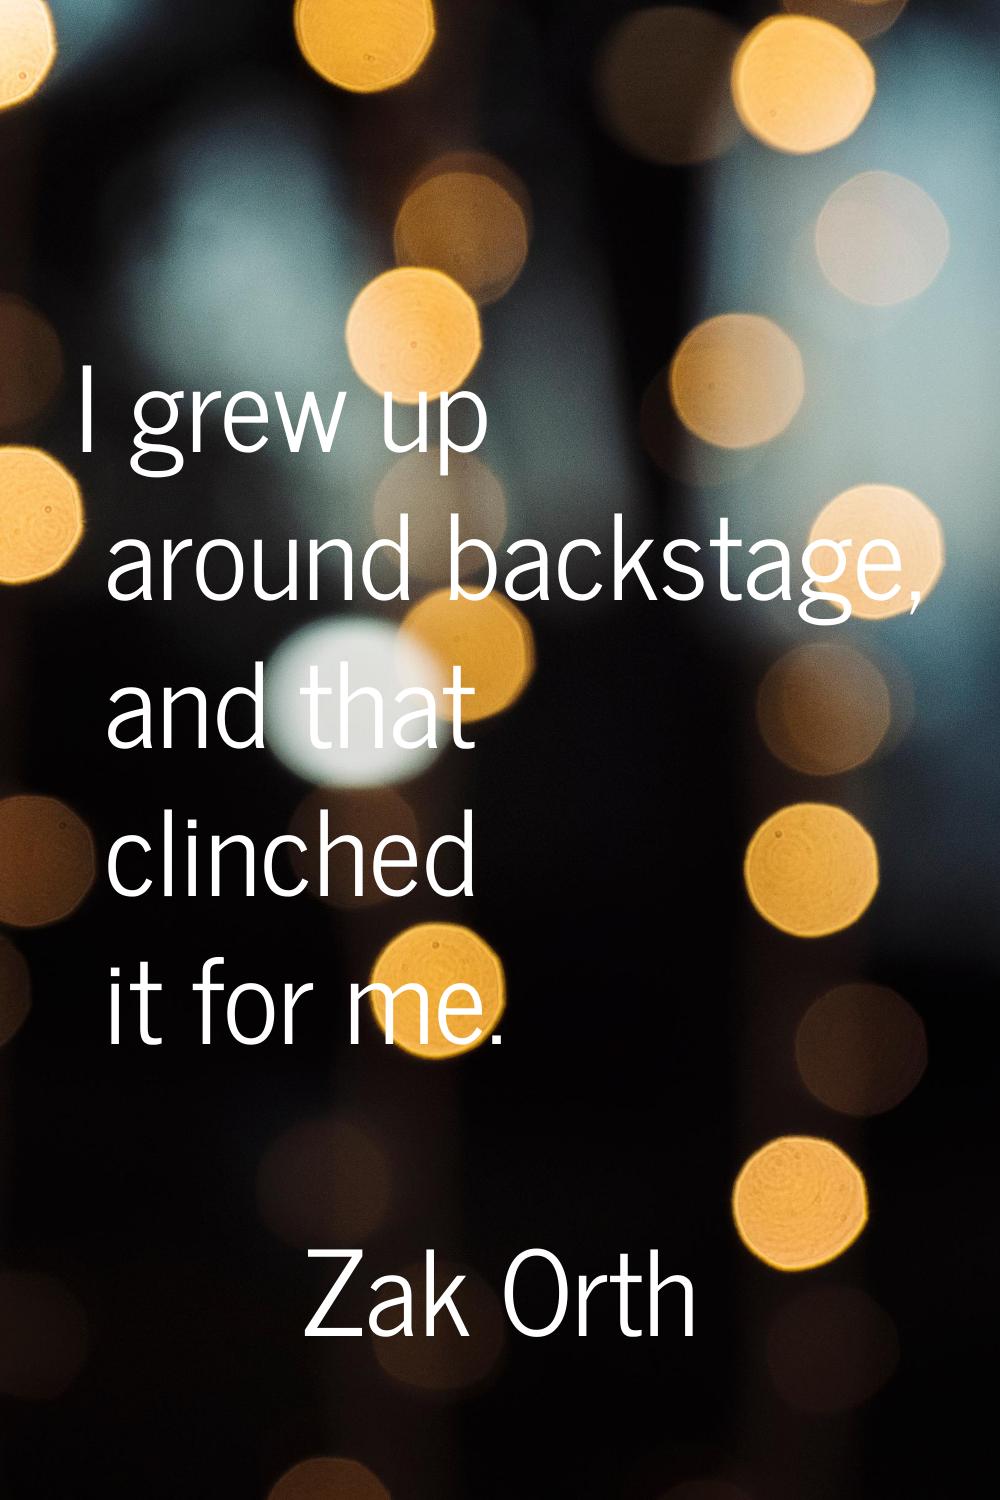 I grew up around backstage, and that clinched it for me.